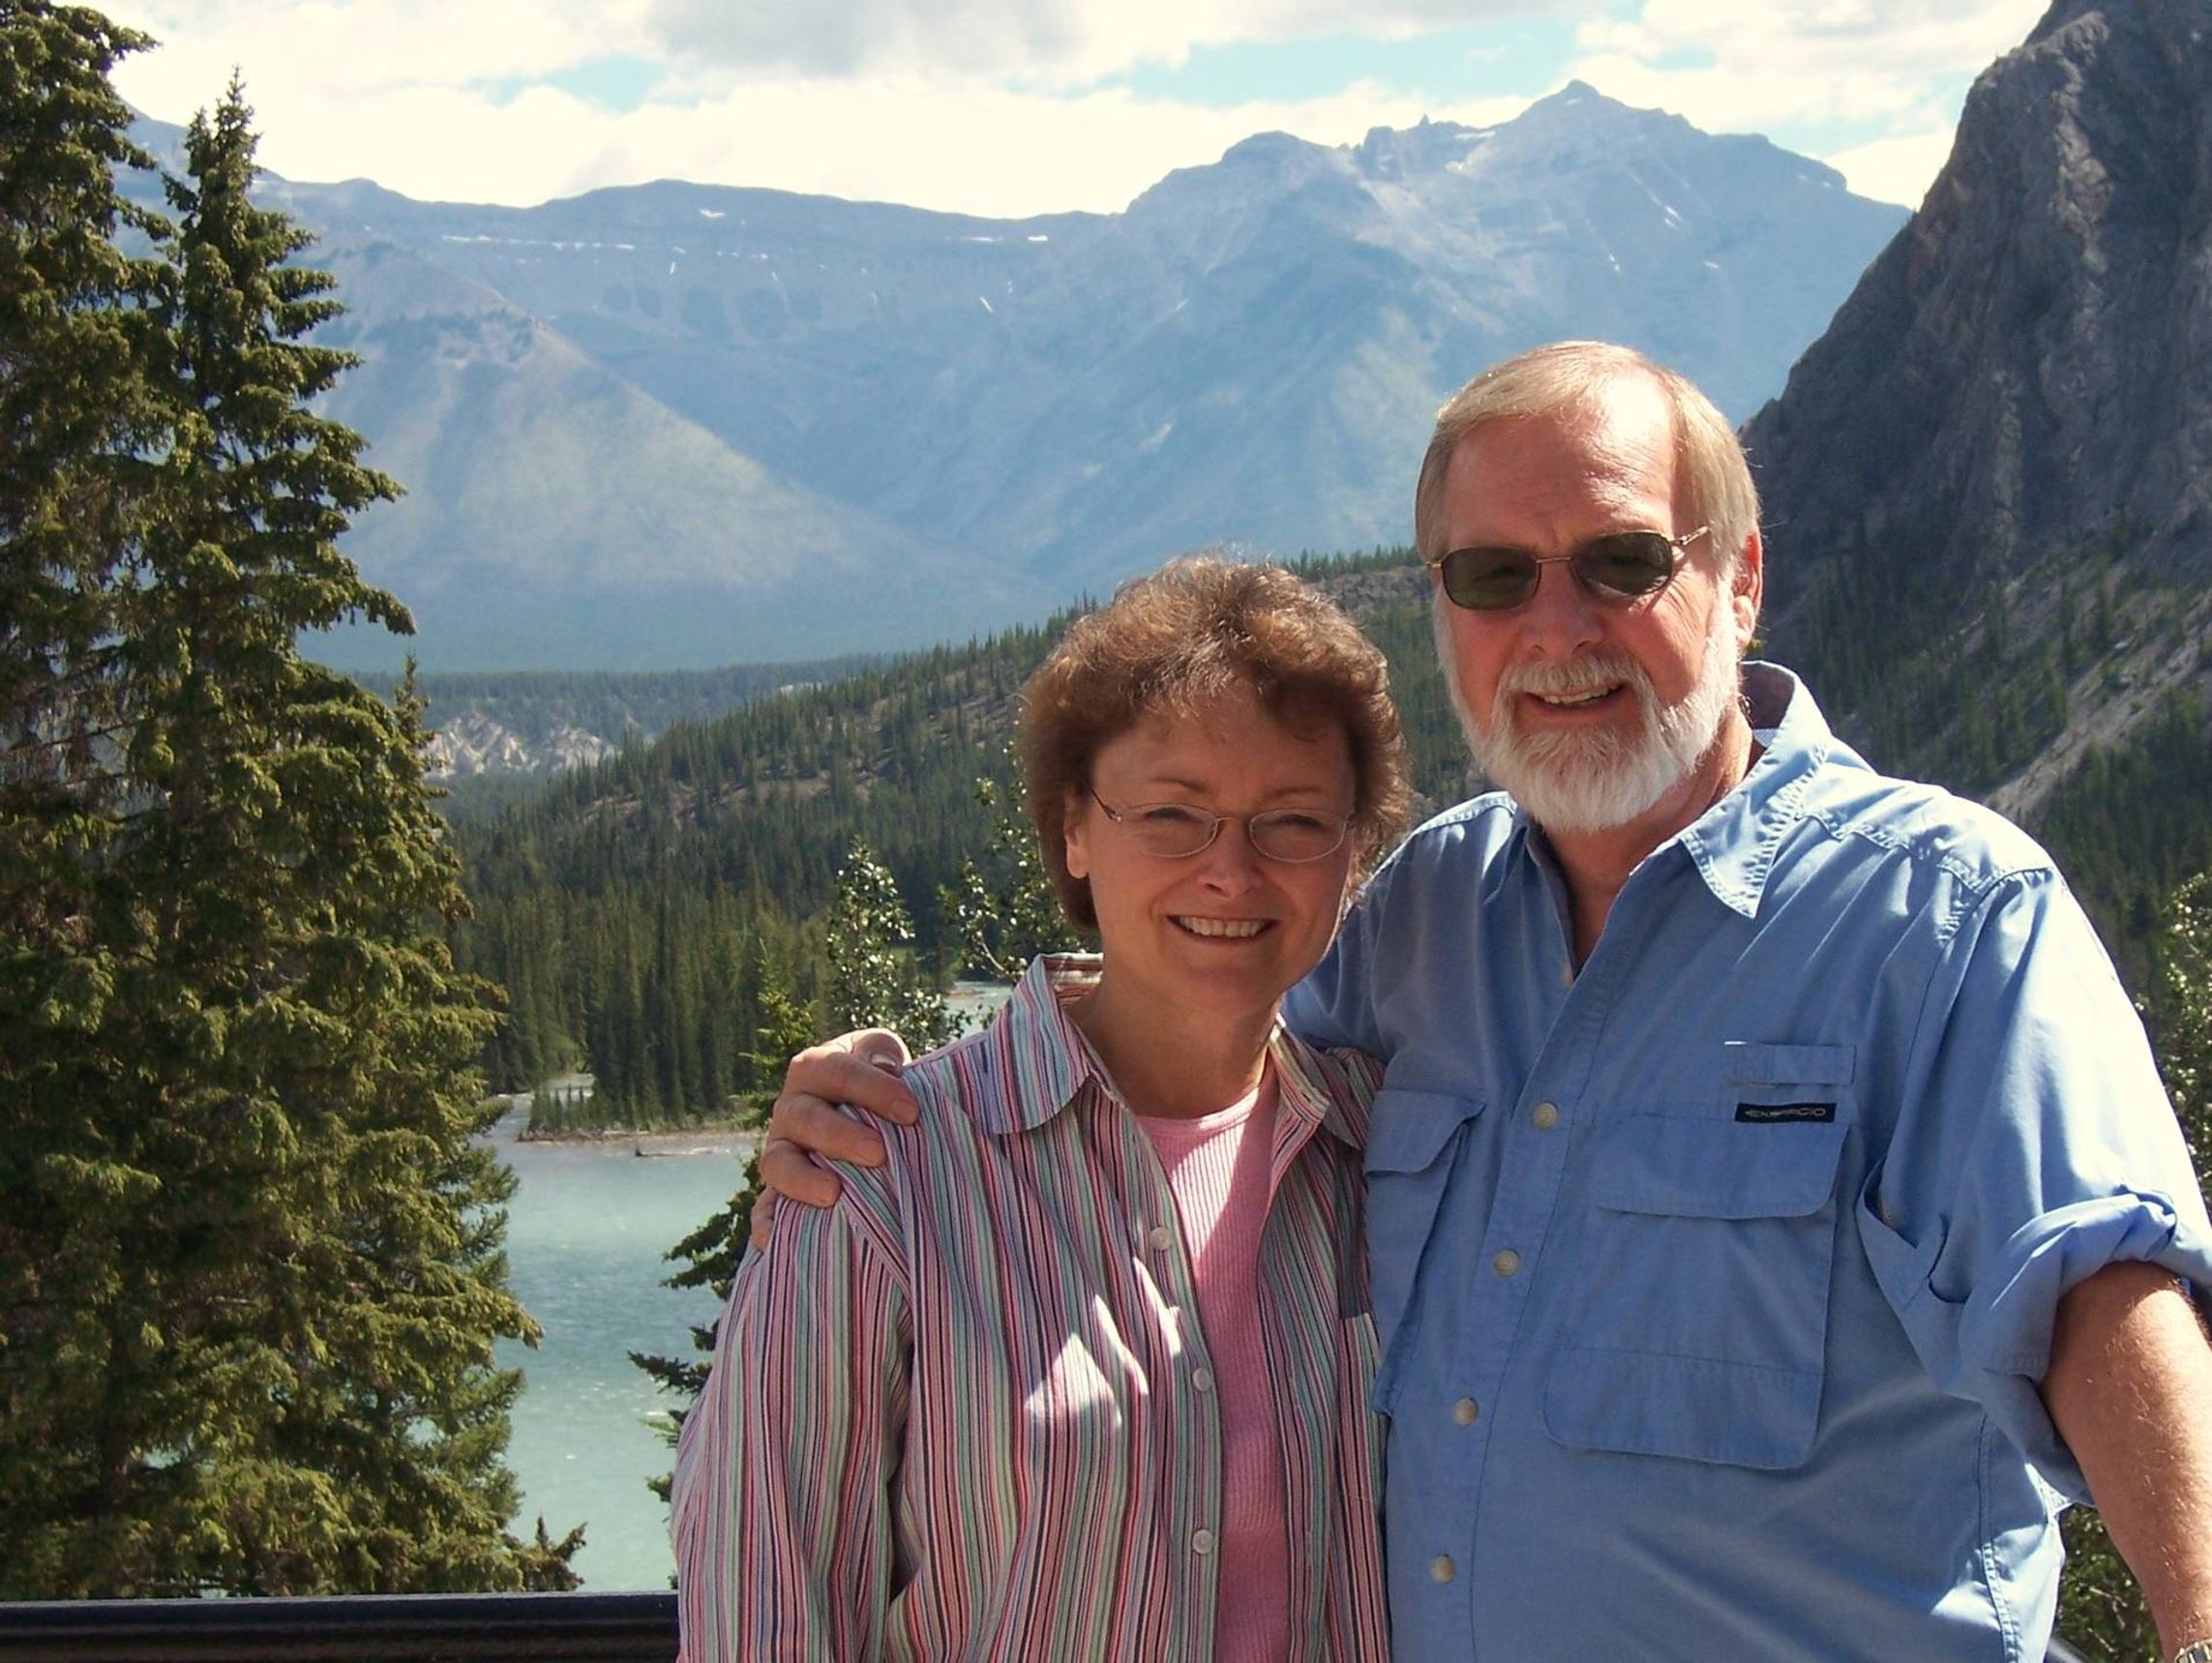 David and Linda stand in front of a picturesque scene of a lake and mountains.